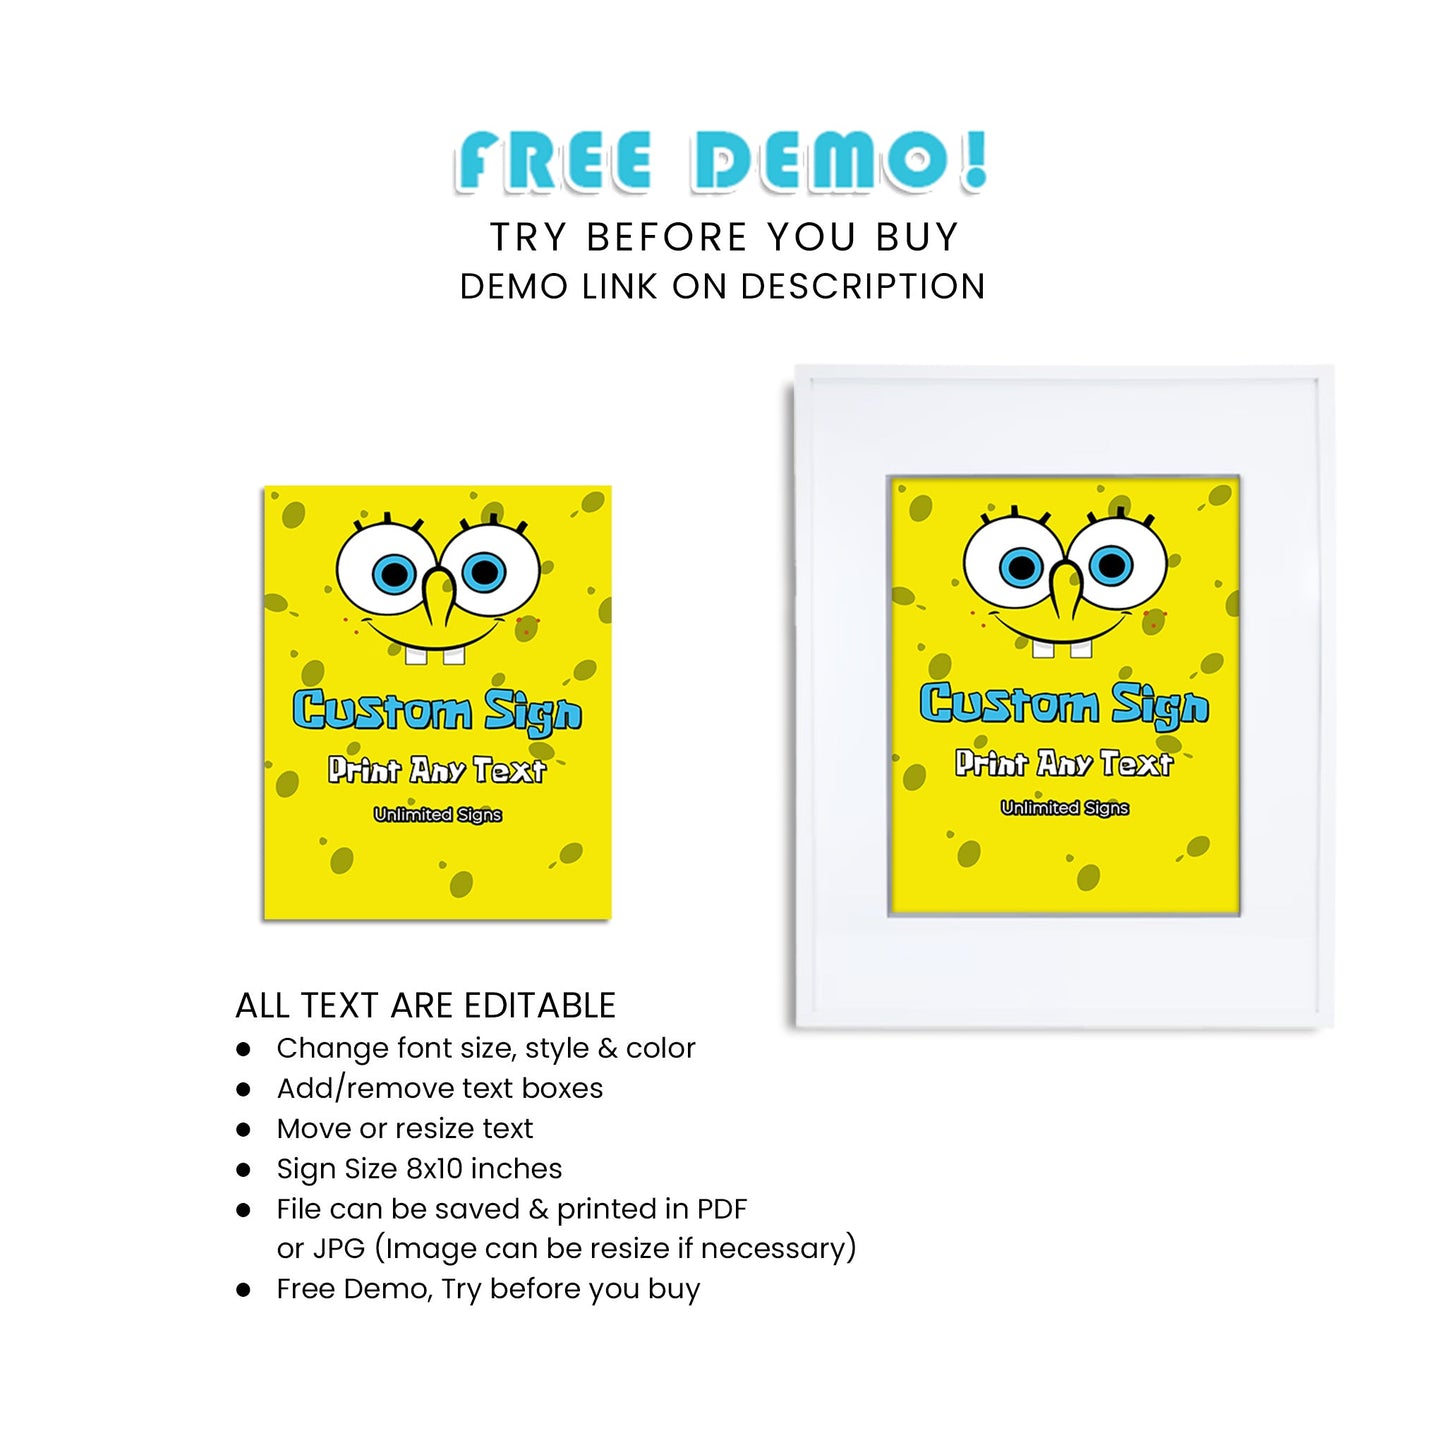 Personalize Your Party Decor with Spongebob Custom Sign